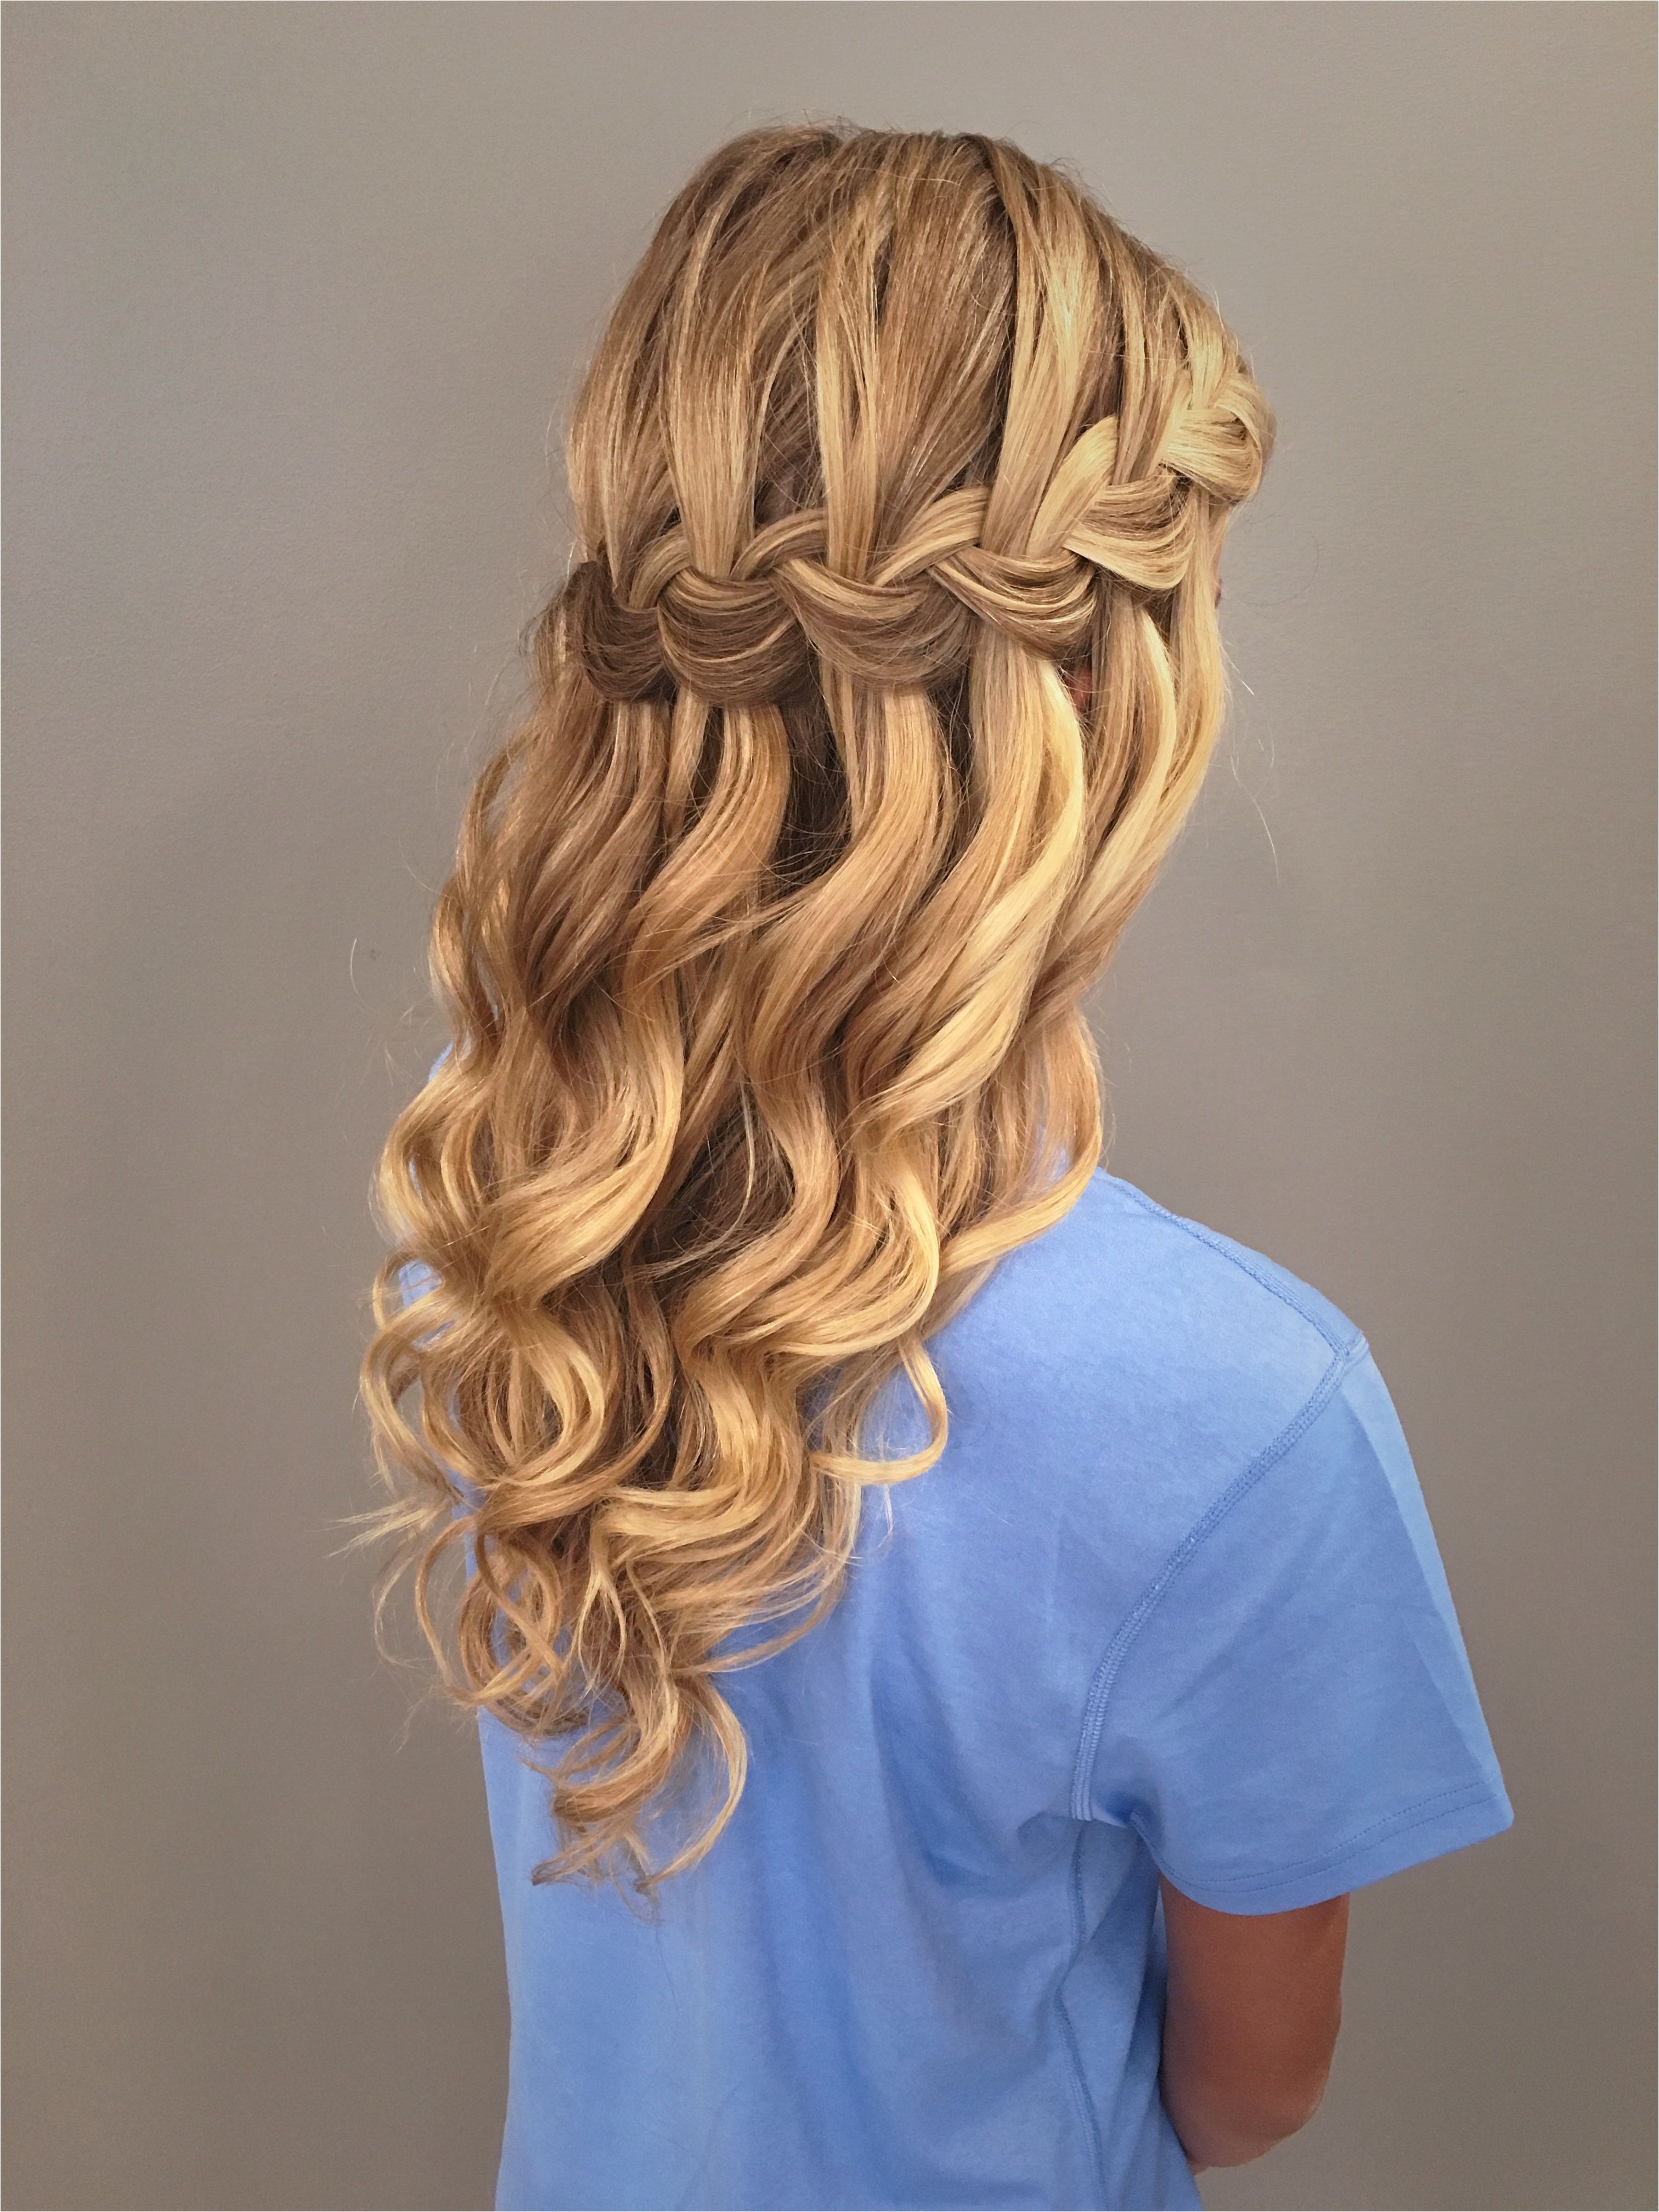 Waterfall braid with mermaid waves Great bridal prom or home ing hairstyle